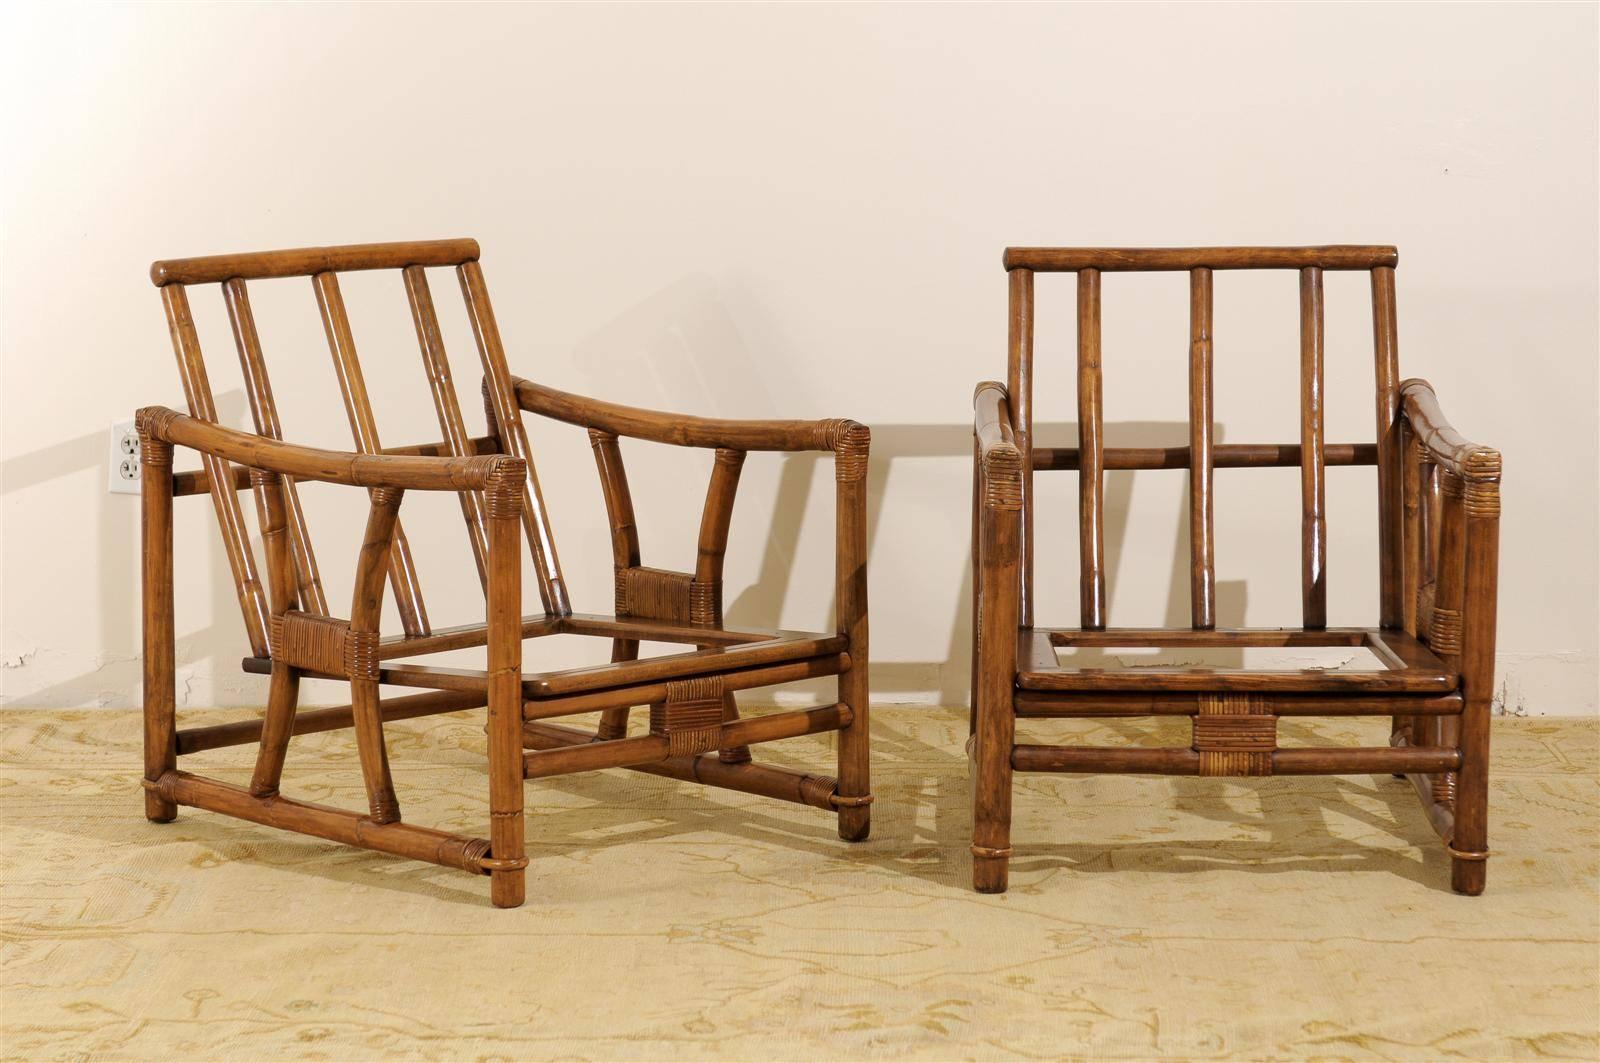 A killer pair of vintage lounge or club chairs by Ficks Reed, circa 1960s. Rattan and hardwood construction with beautiful raffia binding detail. Aged to absolute perfection! Stout, comfortable and expertly made. A fabulous conduit to introduce